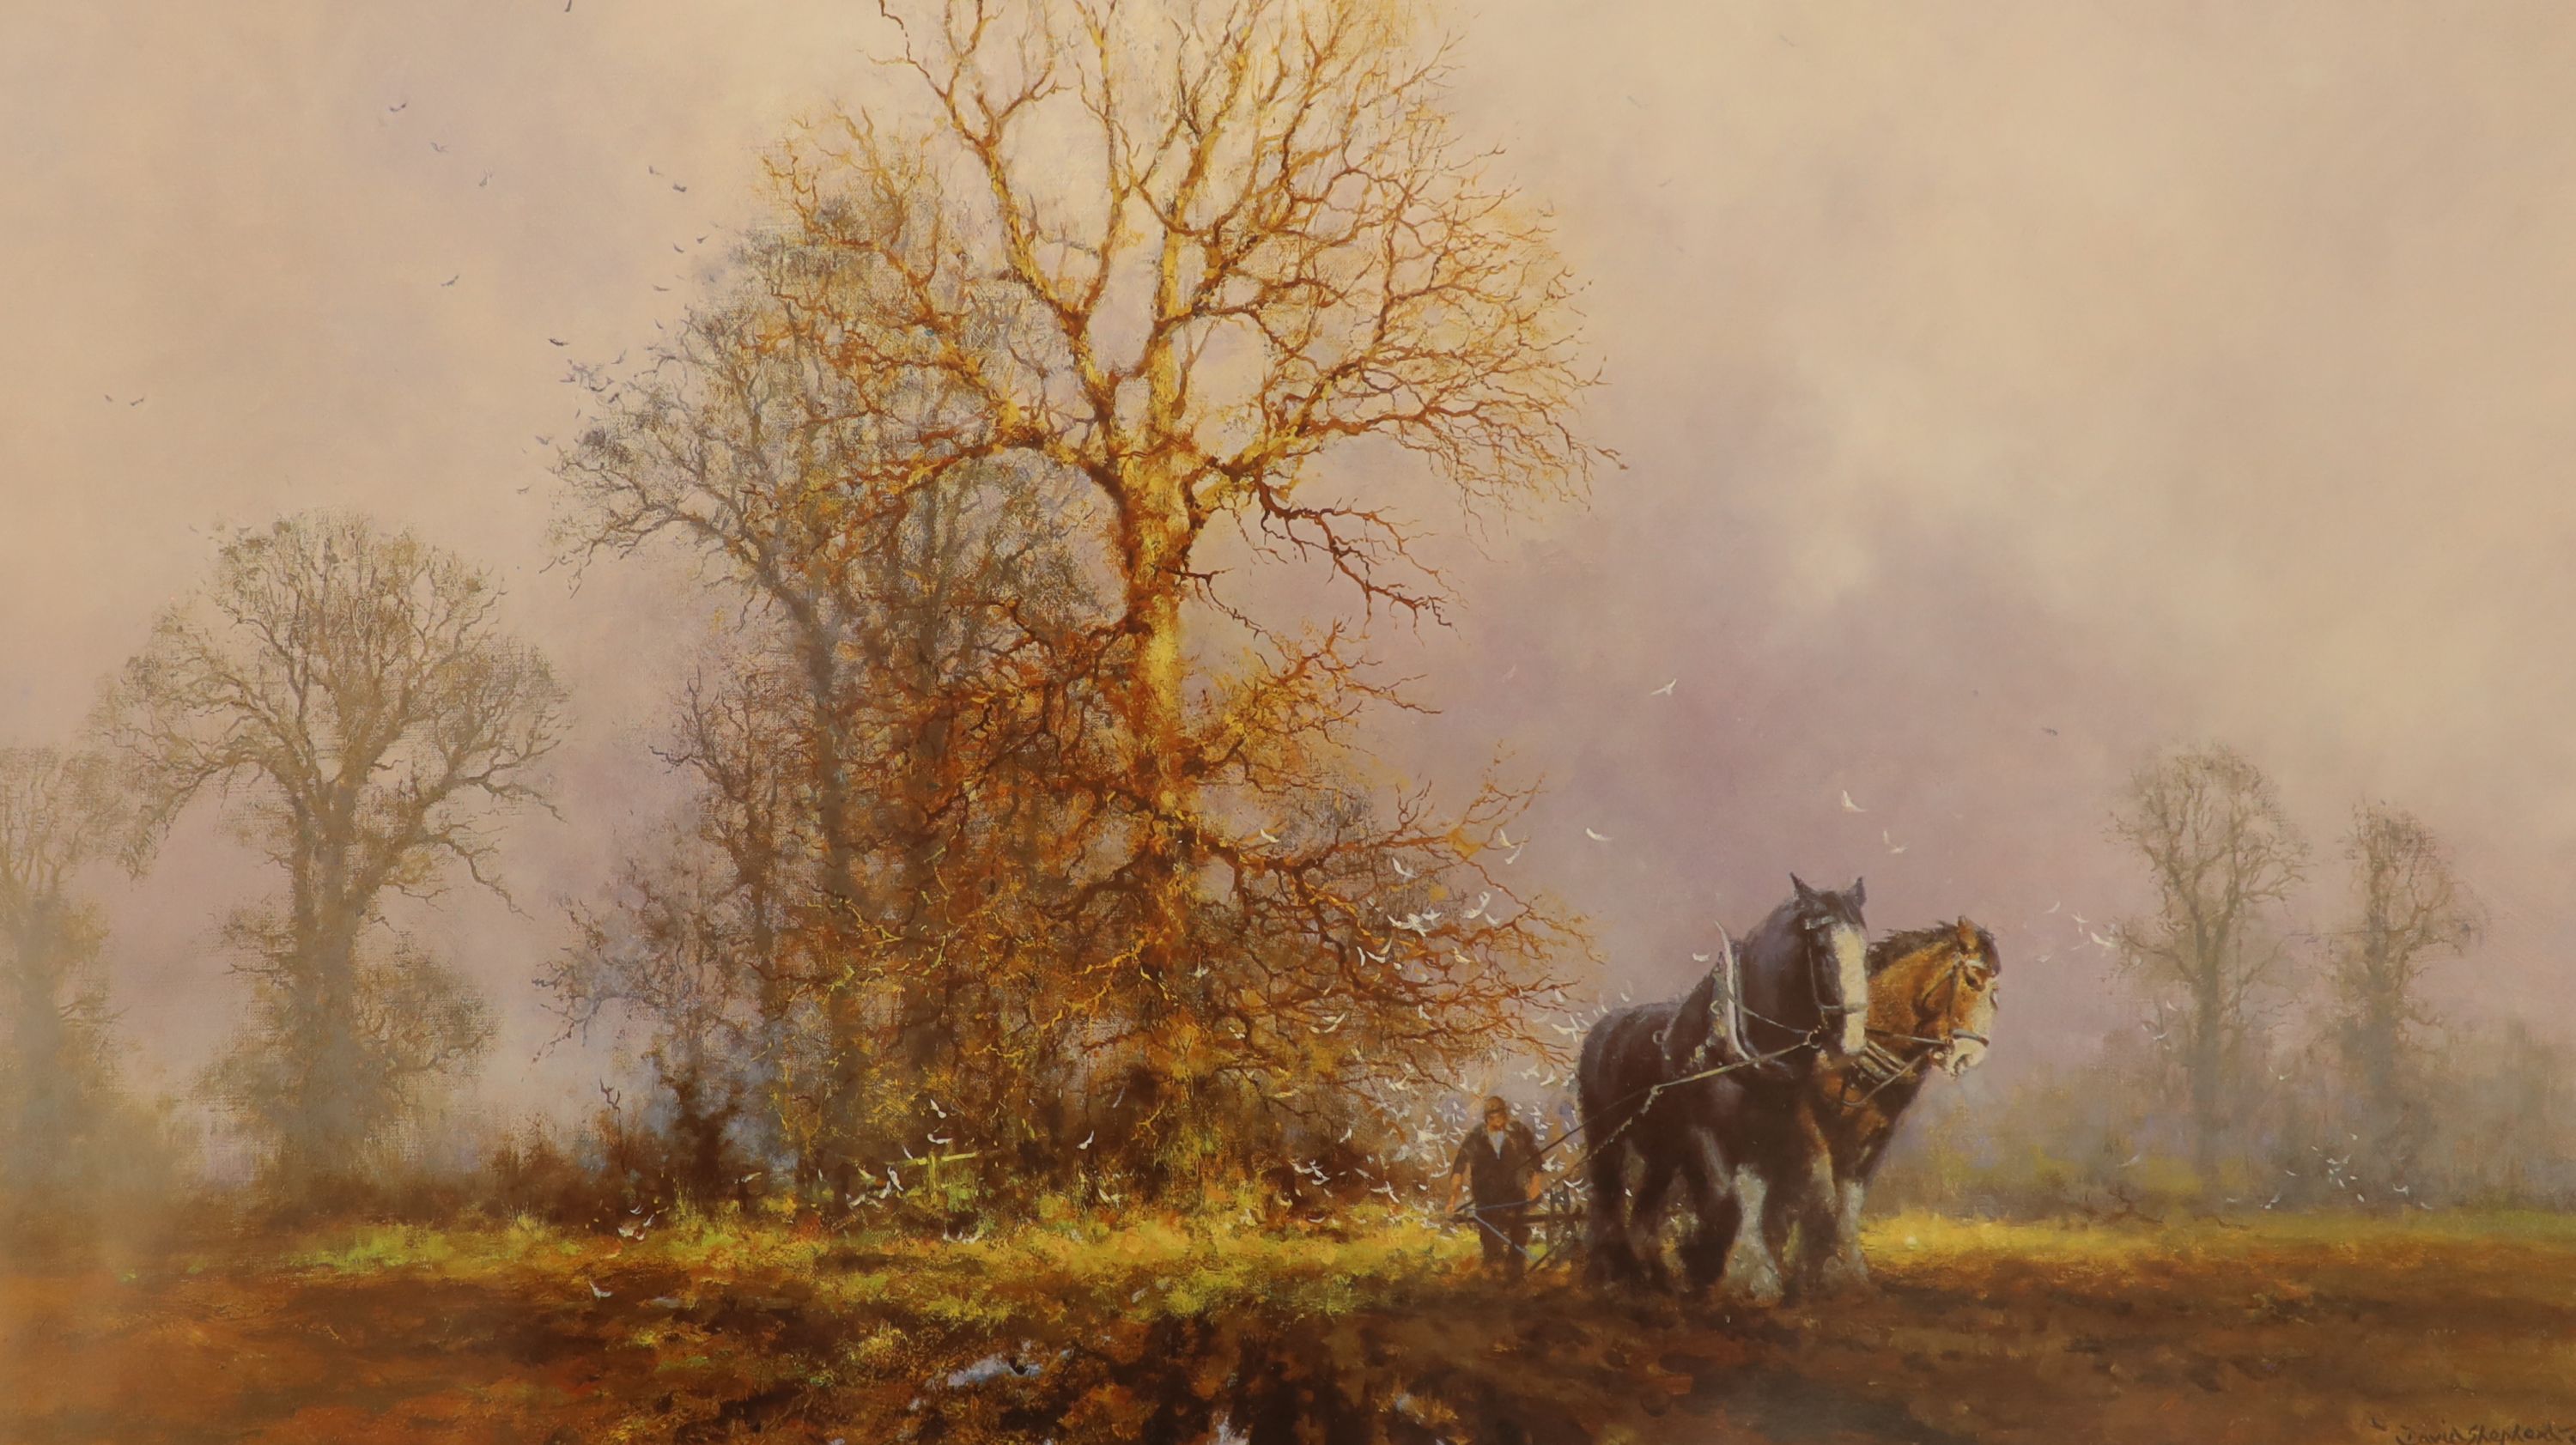 After David Shepherd (1931-2017), a signed limited edition print, 'Captain & Sergeant - the First Furrow of Autumn' and sundry other prints and oil paintings